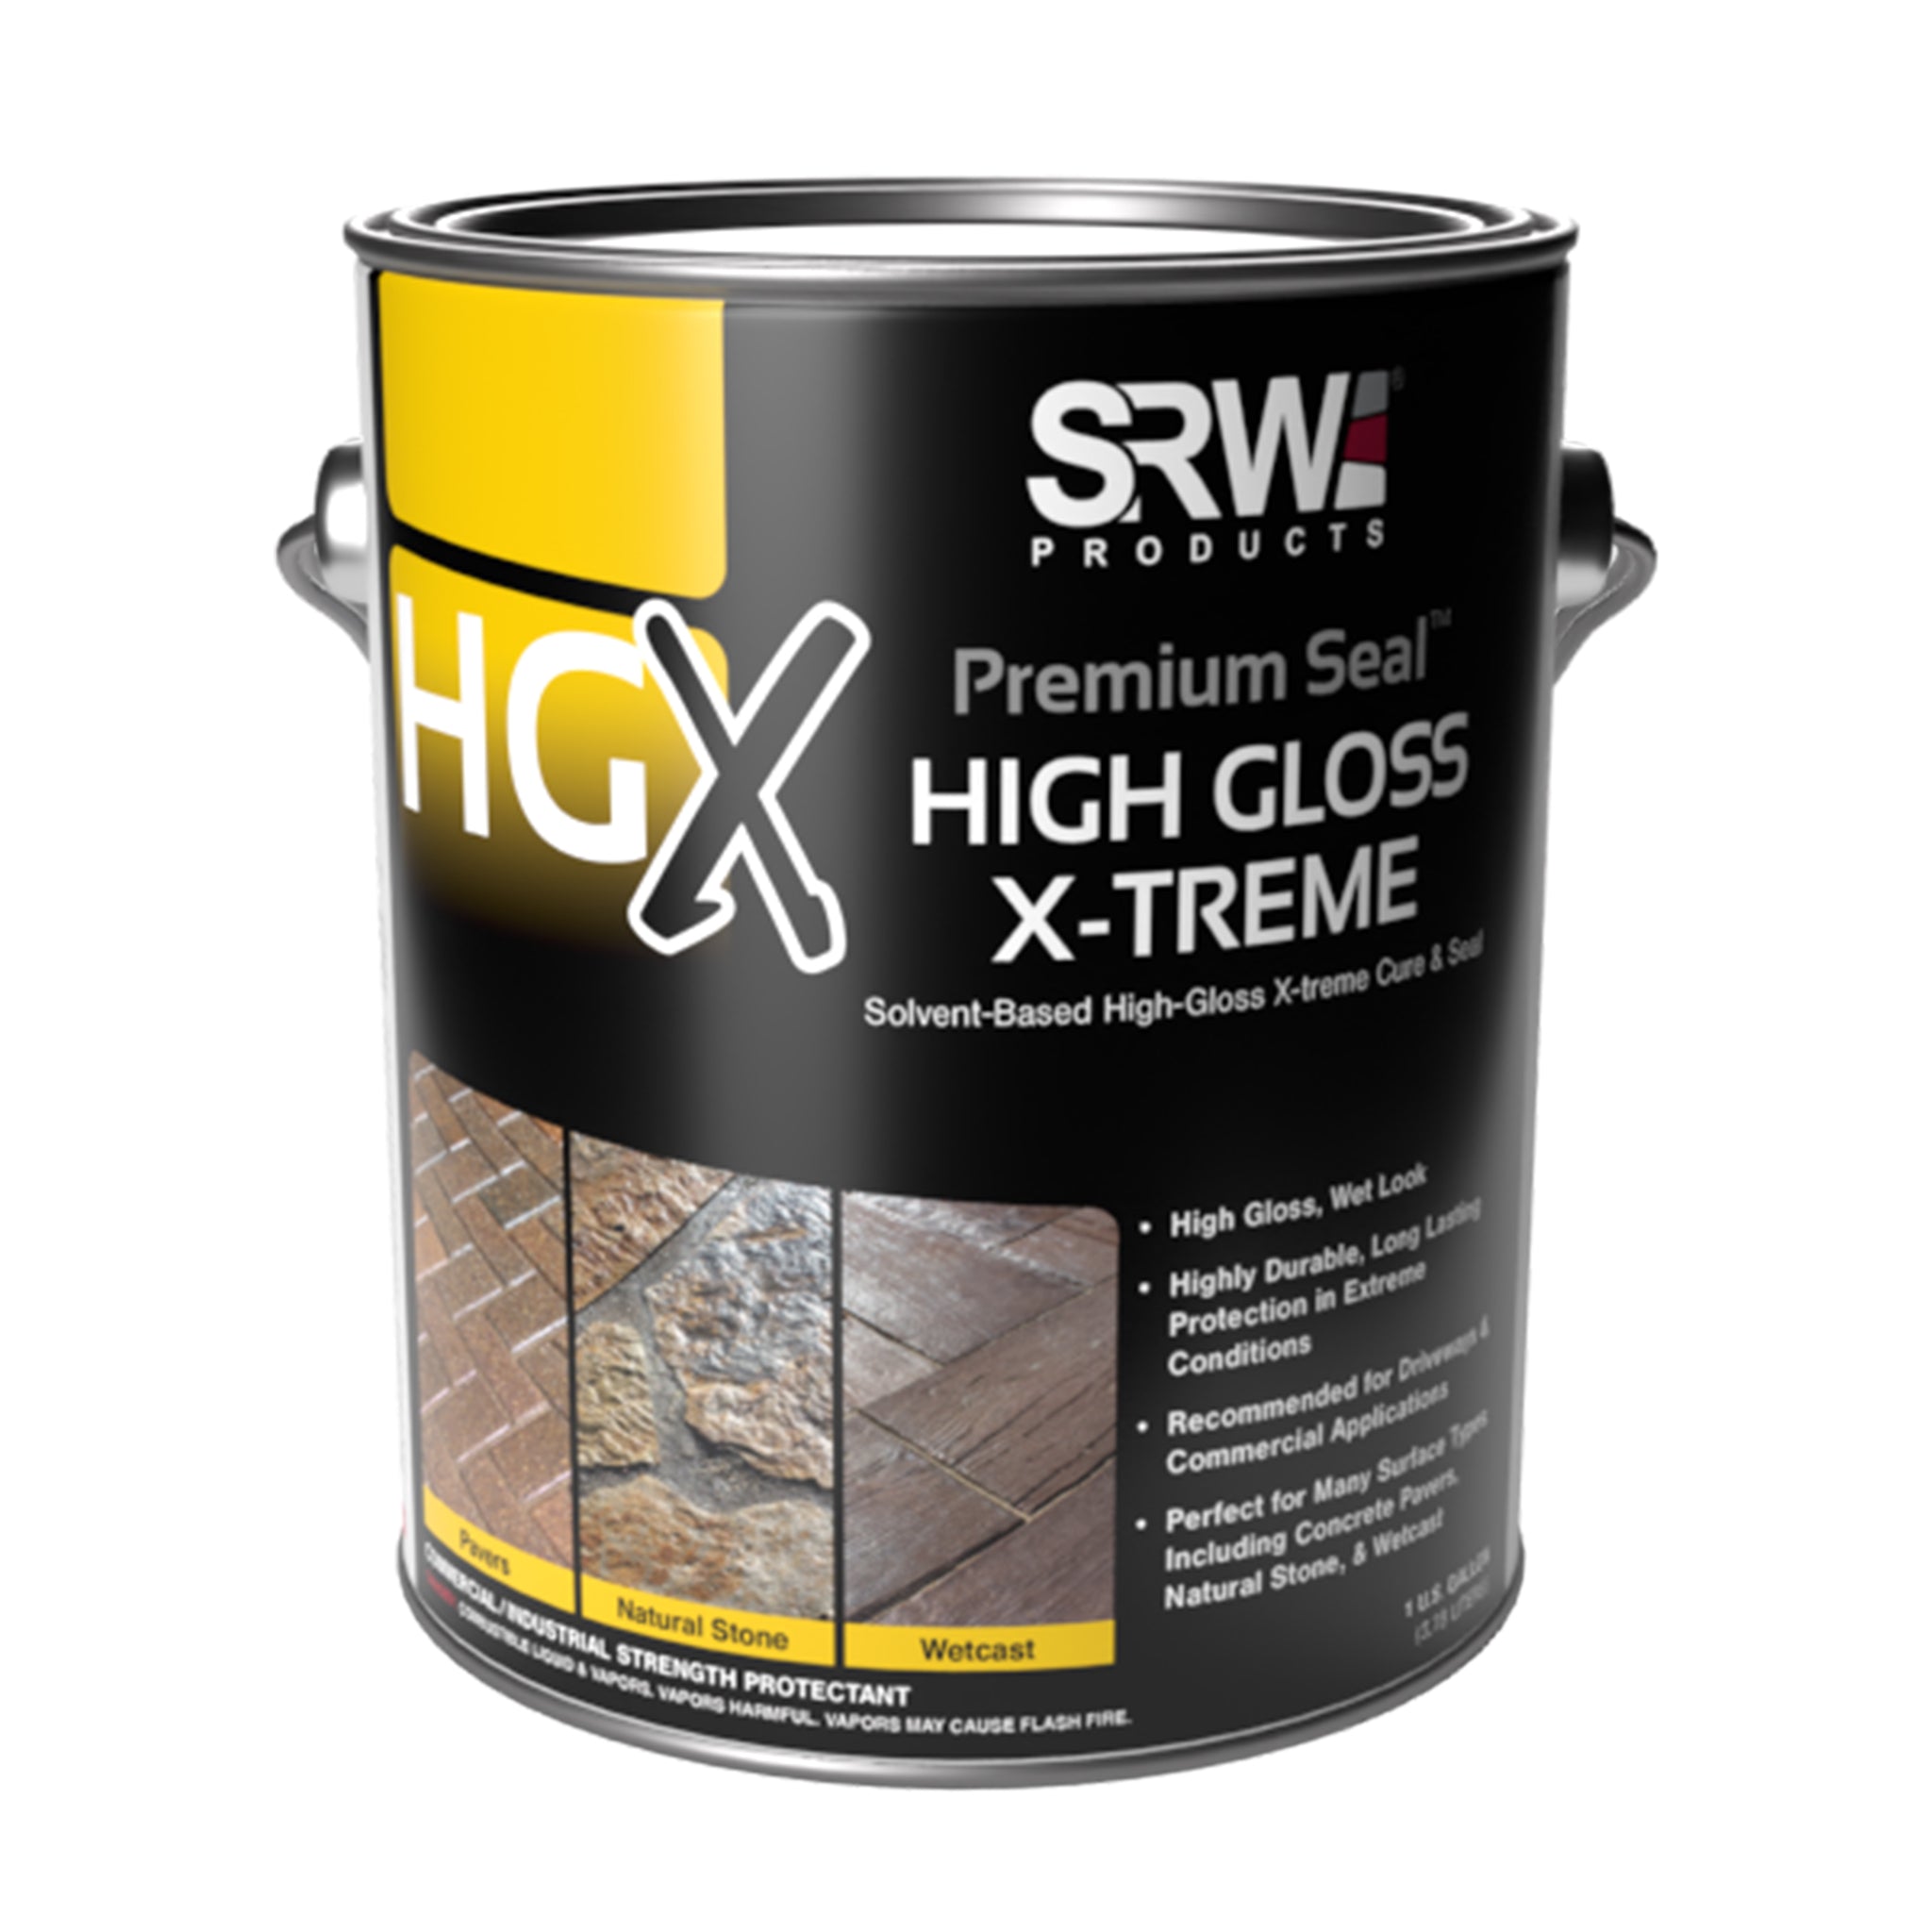 SRW Products HGX High Gloss X-Treme | On The Patio